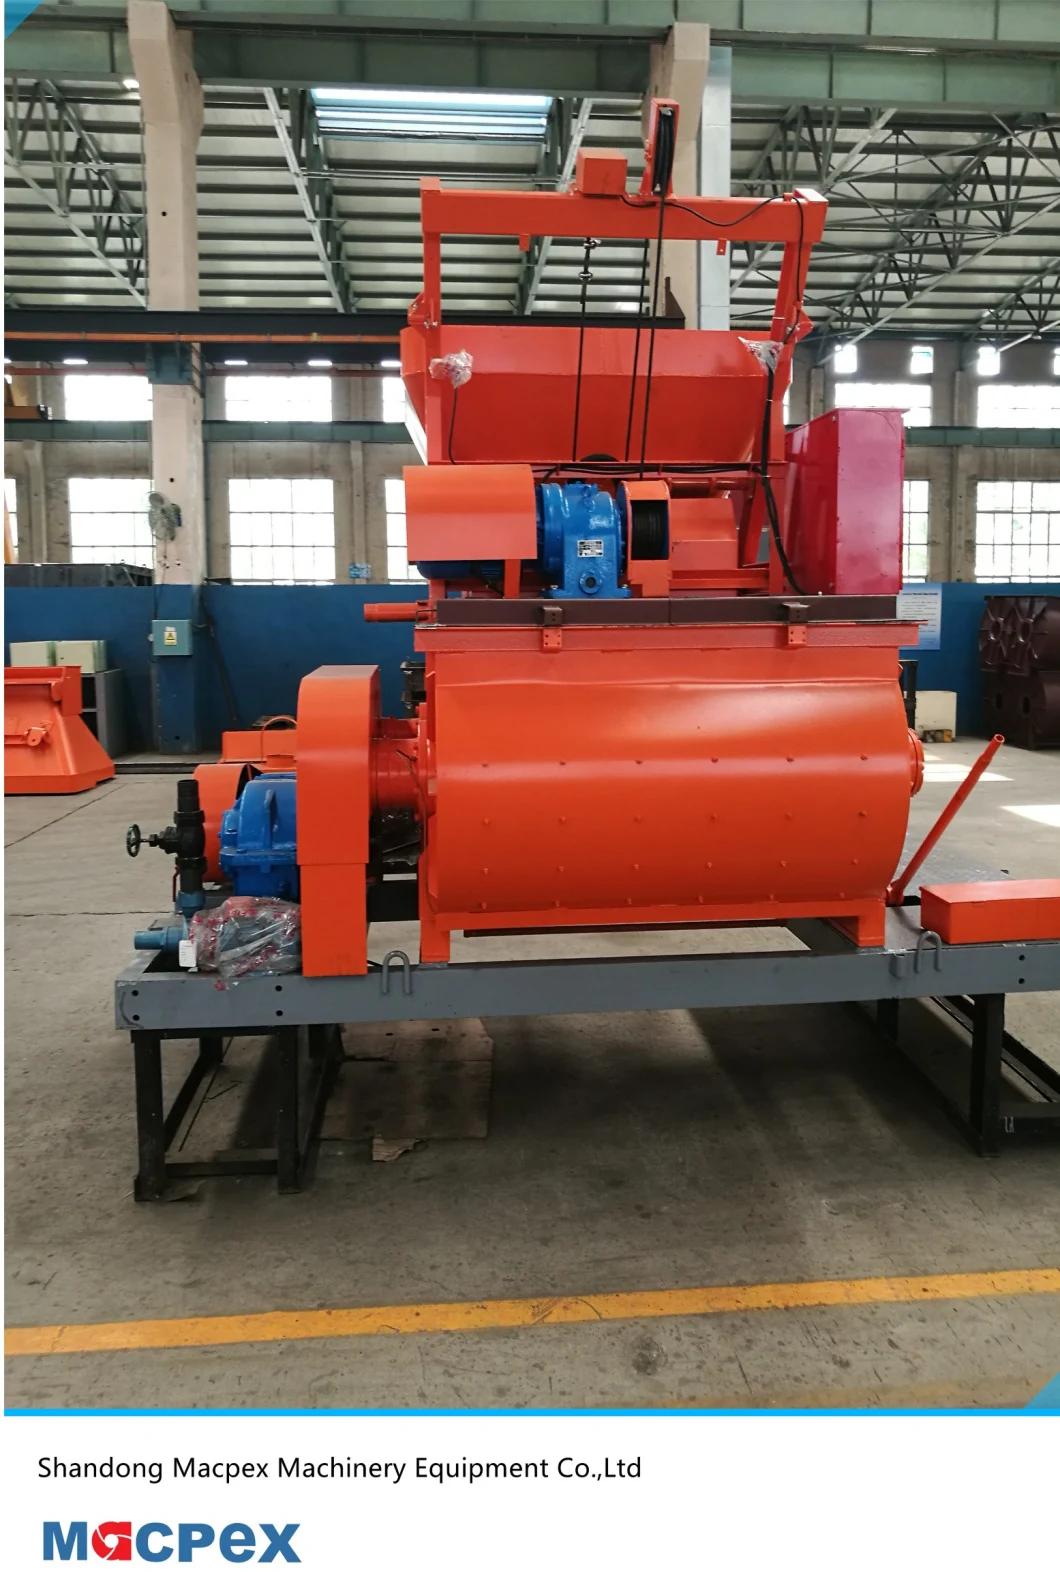 Skip Hopper Type Twin Shaft Mixer for Cement Mixing Plant